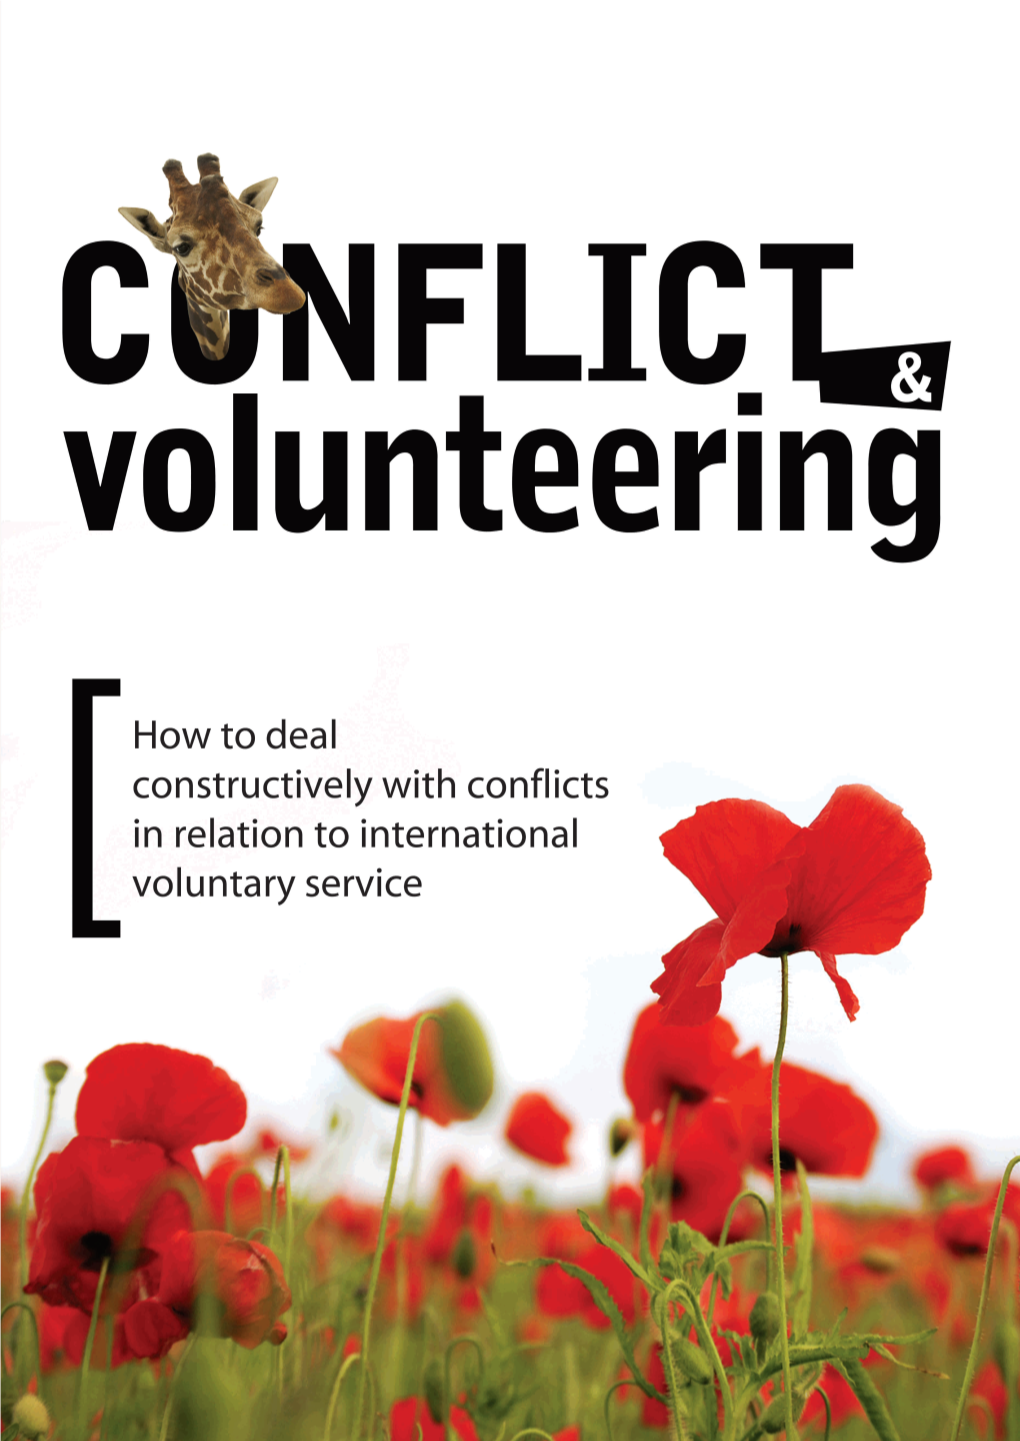 Conflict and Volunteering Has Been Produced by the Coordinating Committee for International Voluntary Service